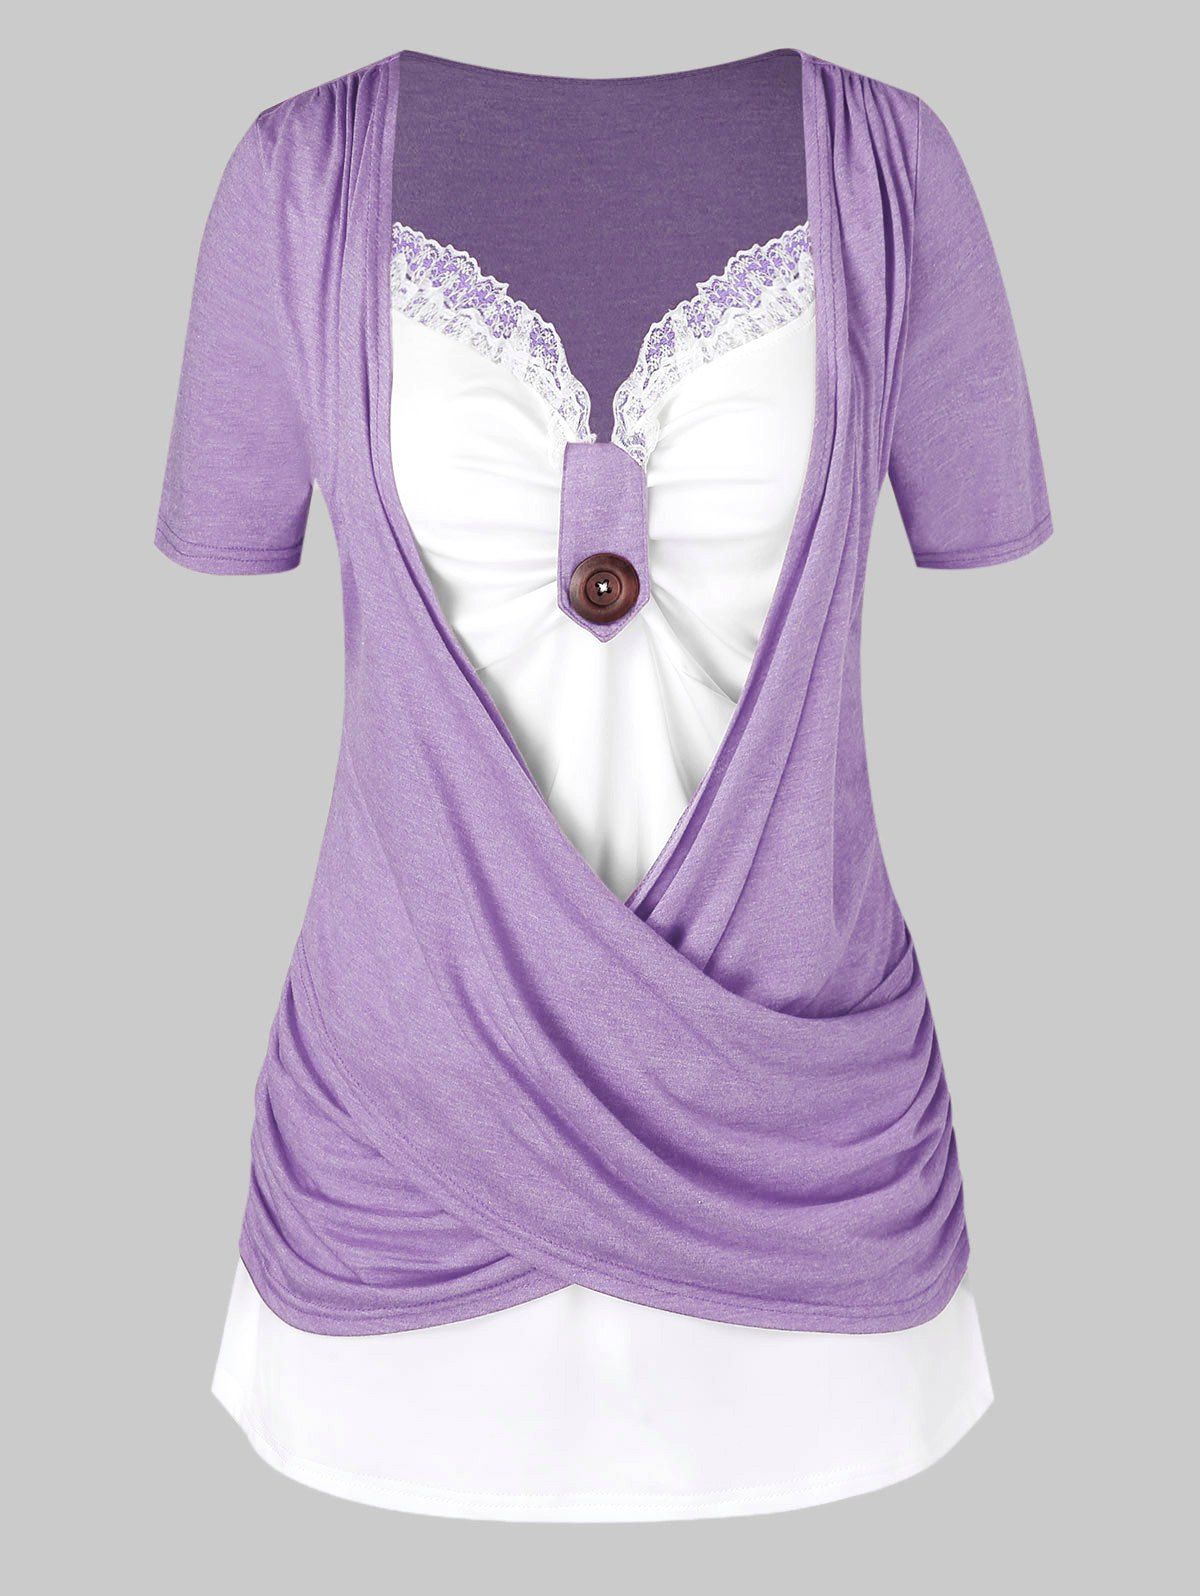 Plus Size T Shirt Crossover Lace Panel Colorblock Casual Faux Twinset Tee - LIGHT PURPLE 5X